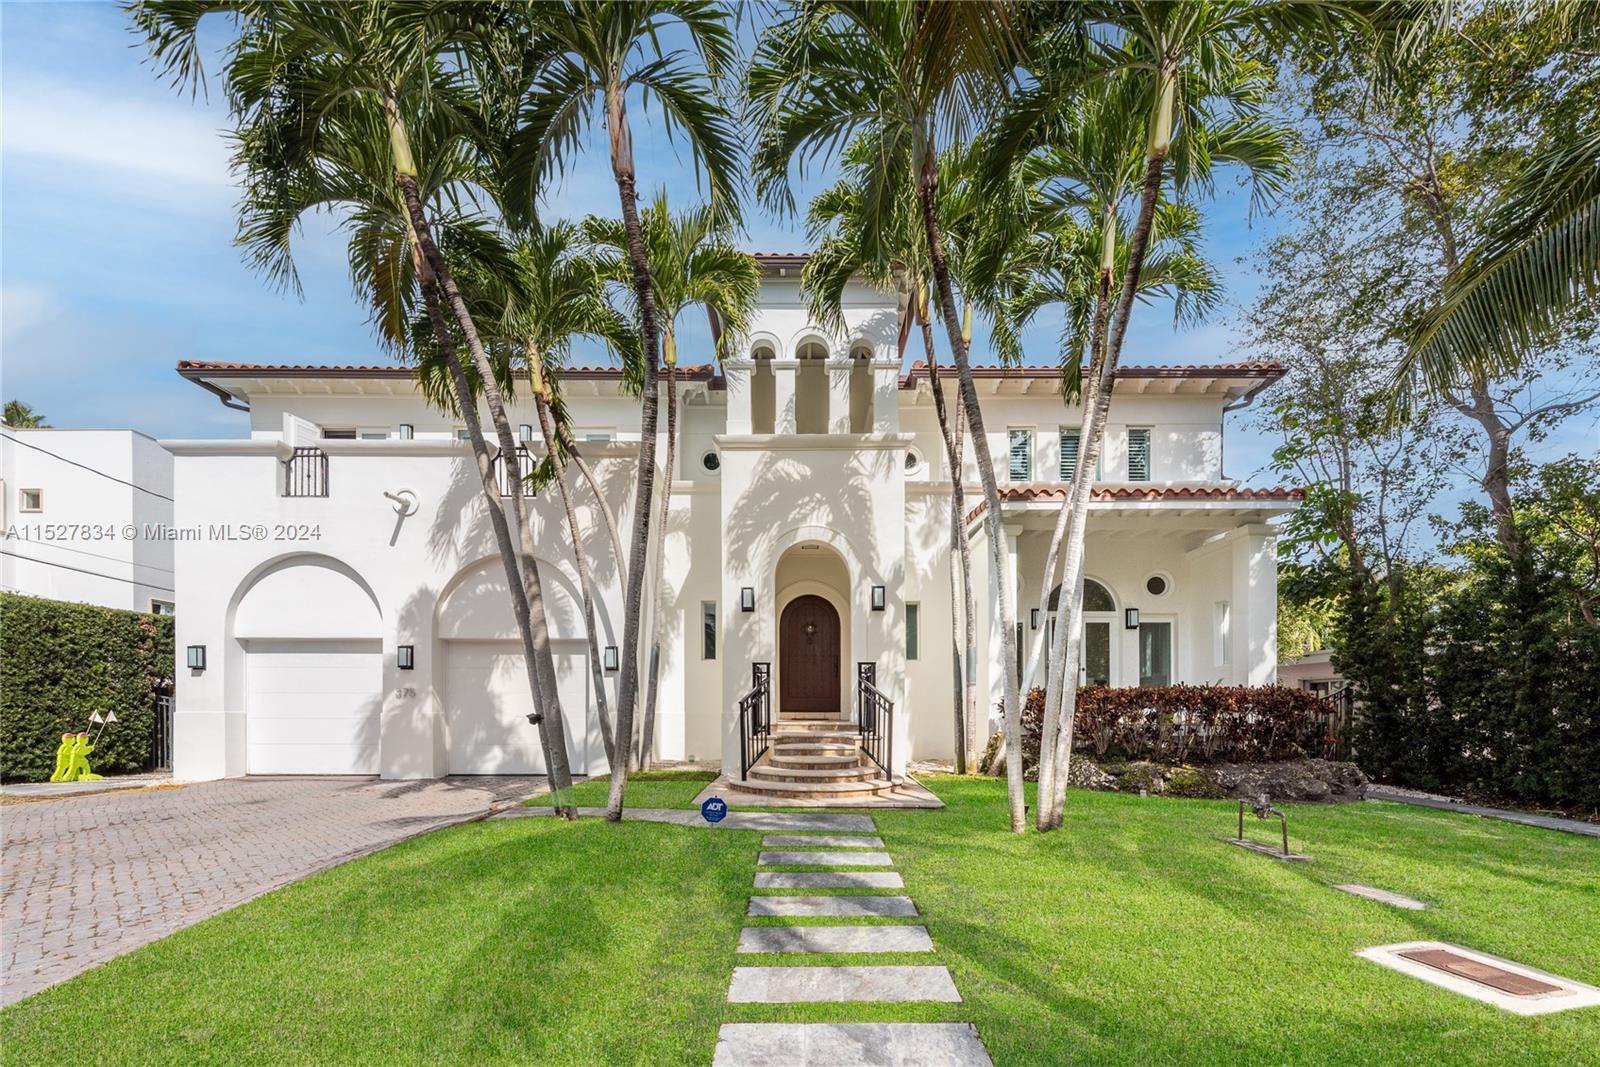 Property for Sale at 375 Harbor Ln Ln, Key Biscayne, Miami-Dade County, Florida - Bedrooms: 5 
Bathrooms: 5  - $5,950,000